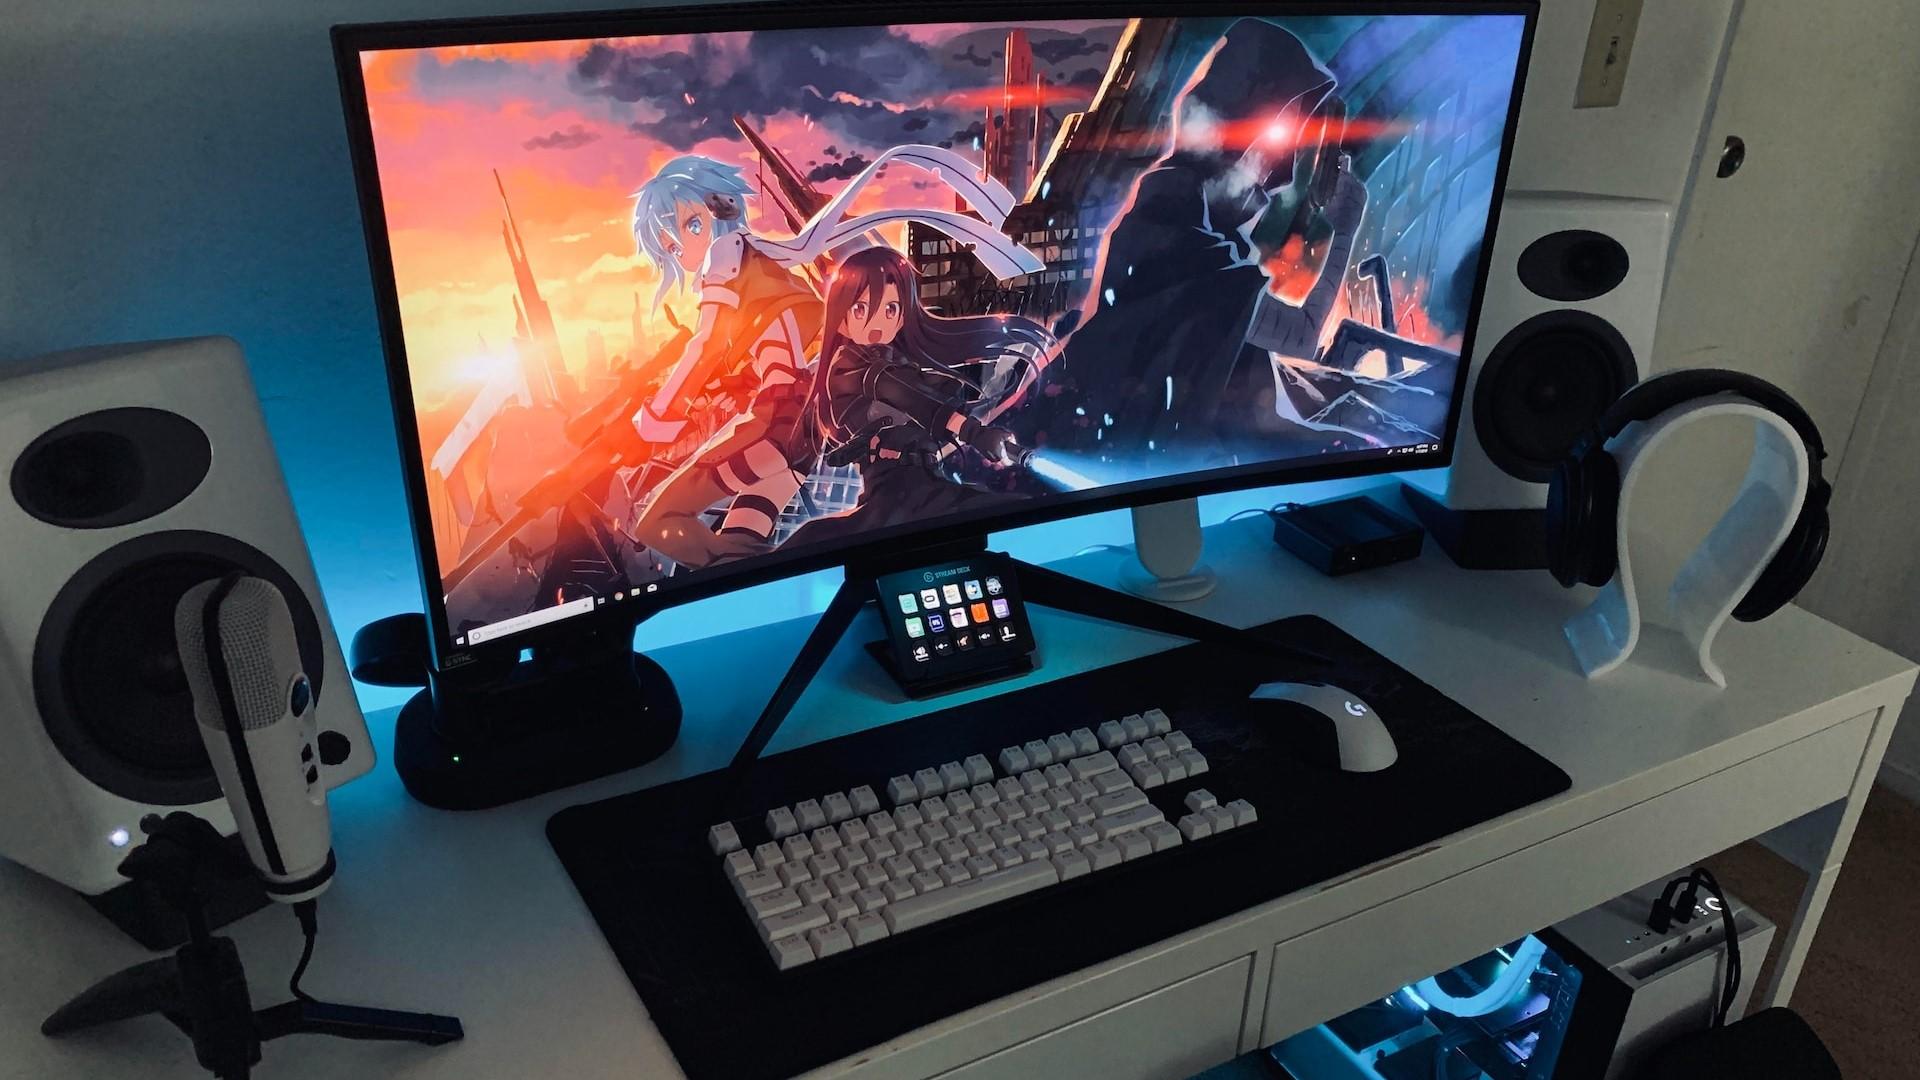 Step up Your Game with 8 Gaming Desk Accessories